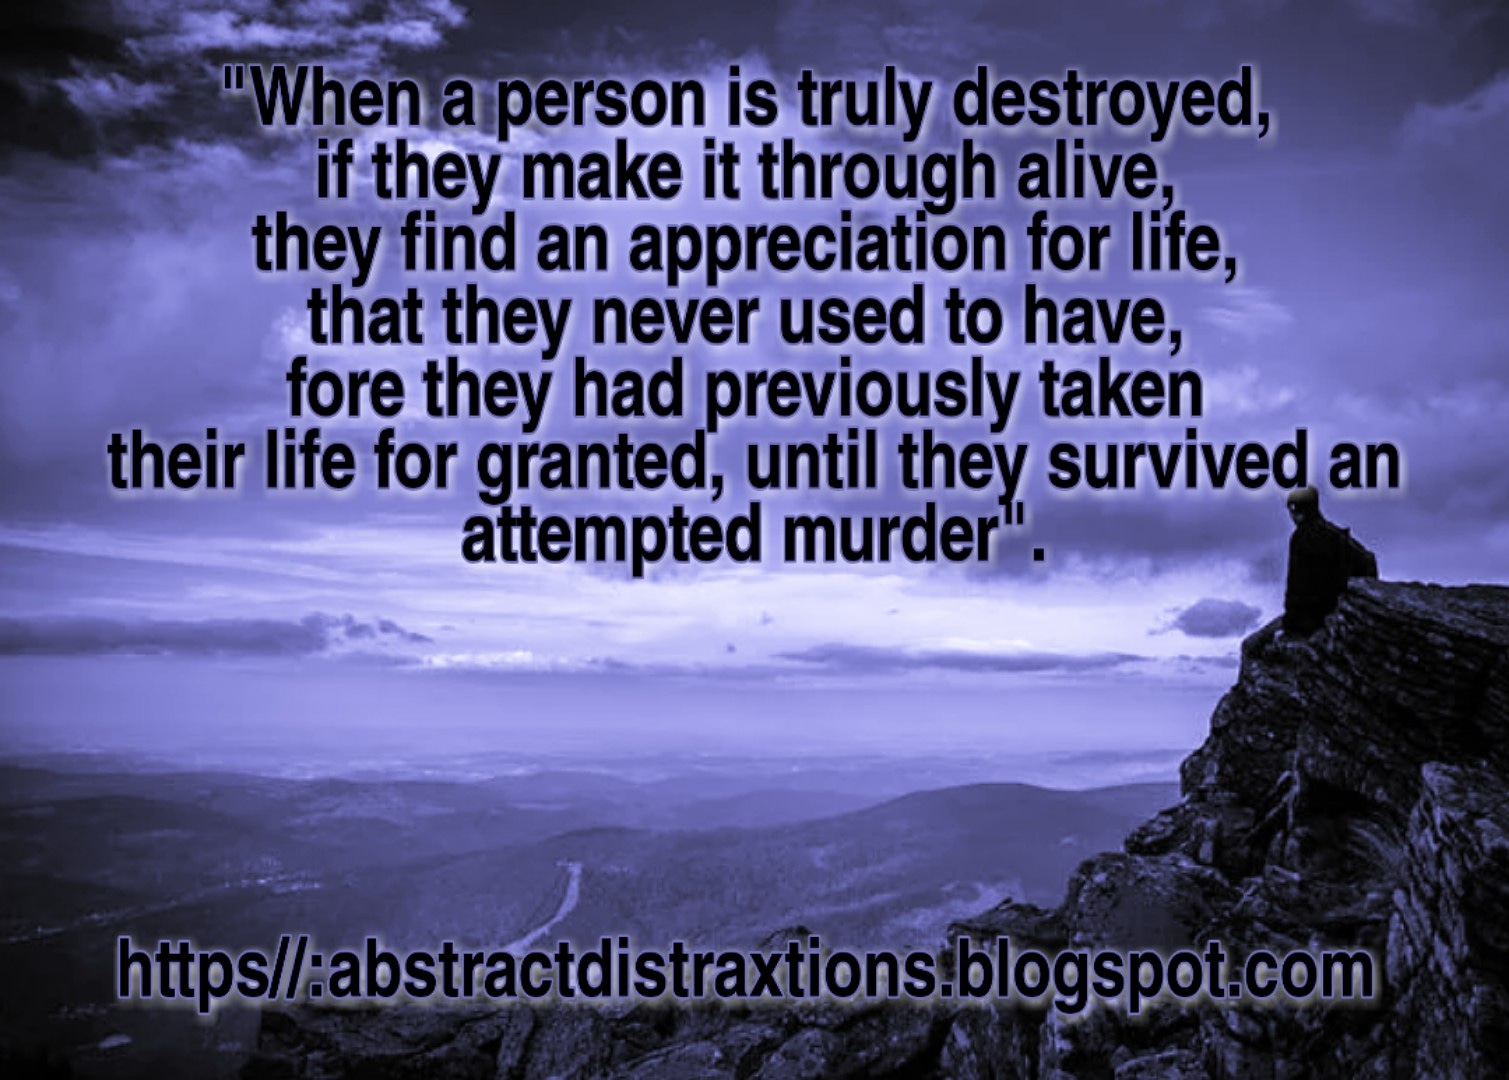 A poem that says When a person is truly destroyed, if they make it through alive, they find an appreciation for life, that they never used to have, fore they had previously taken their life for granted, until they survived an attempted murder.